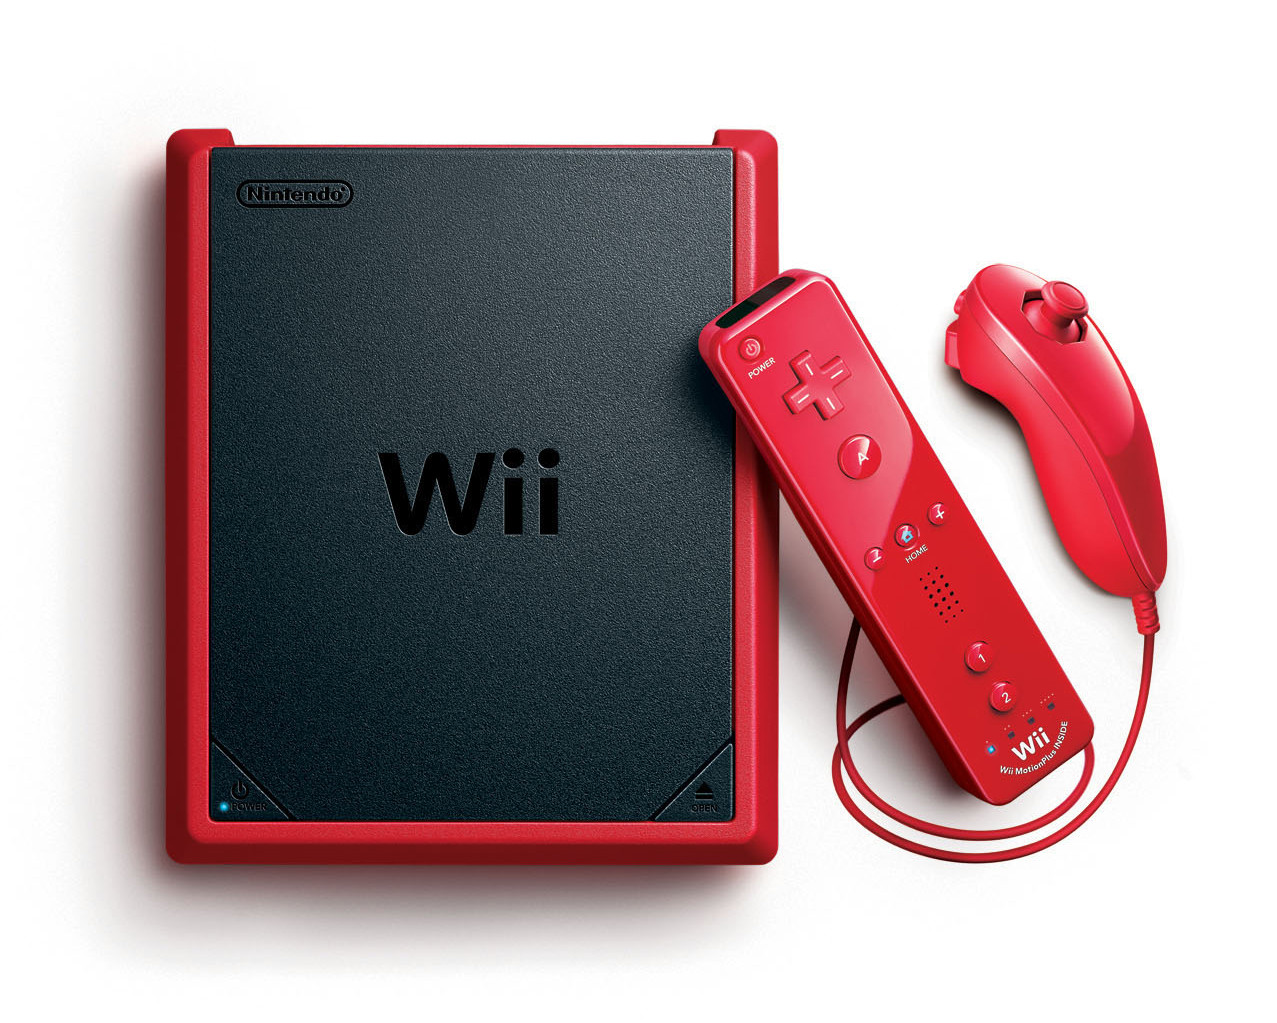 Wii Mini Launching March 22nd In Europe